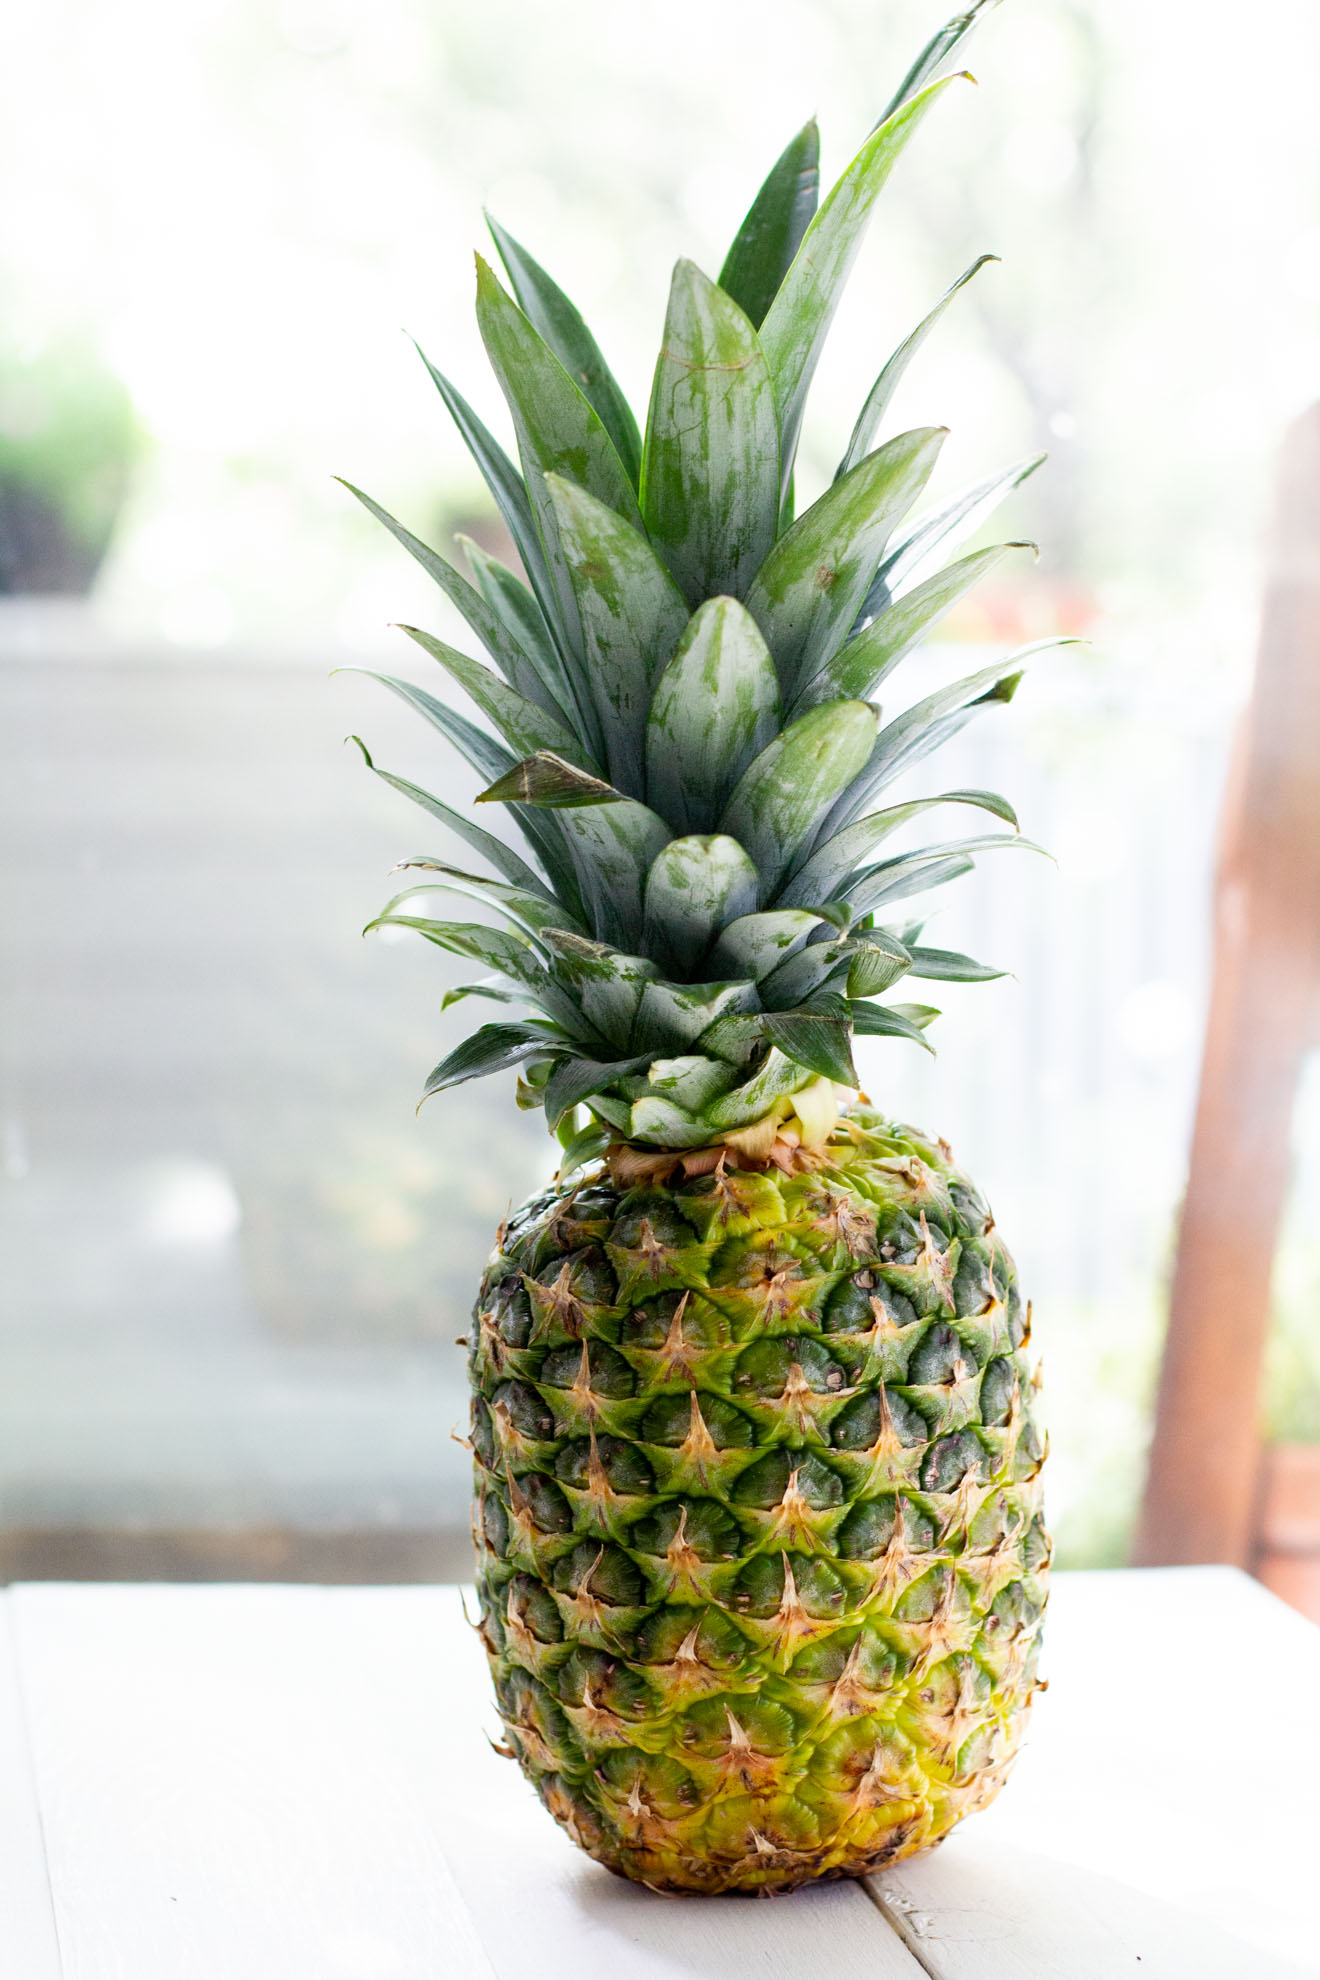 juicy and ripe pineapple